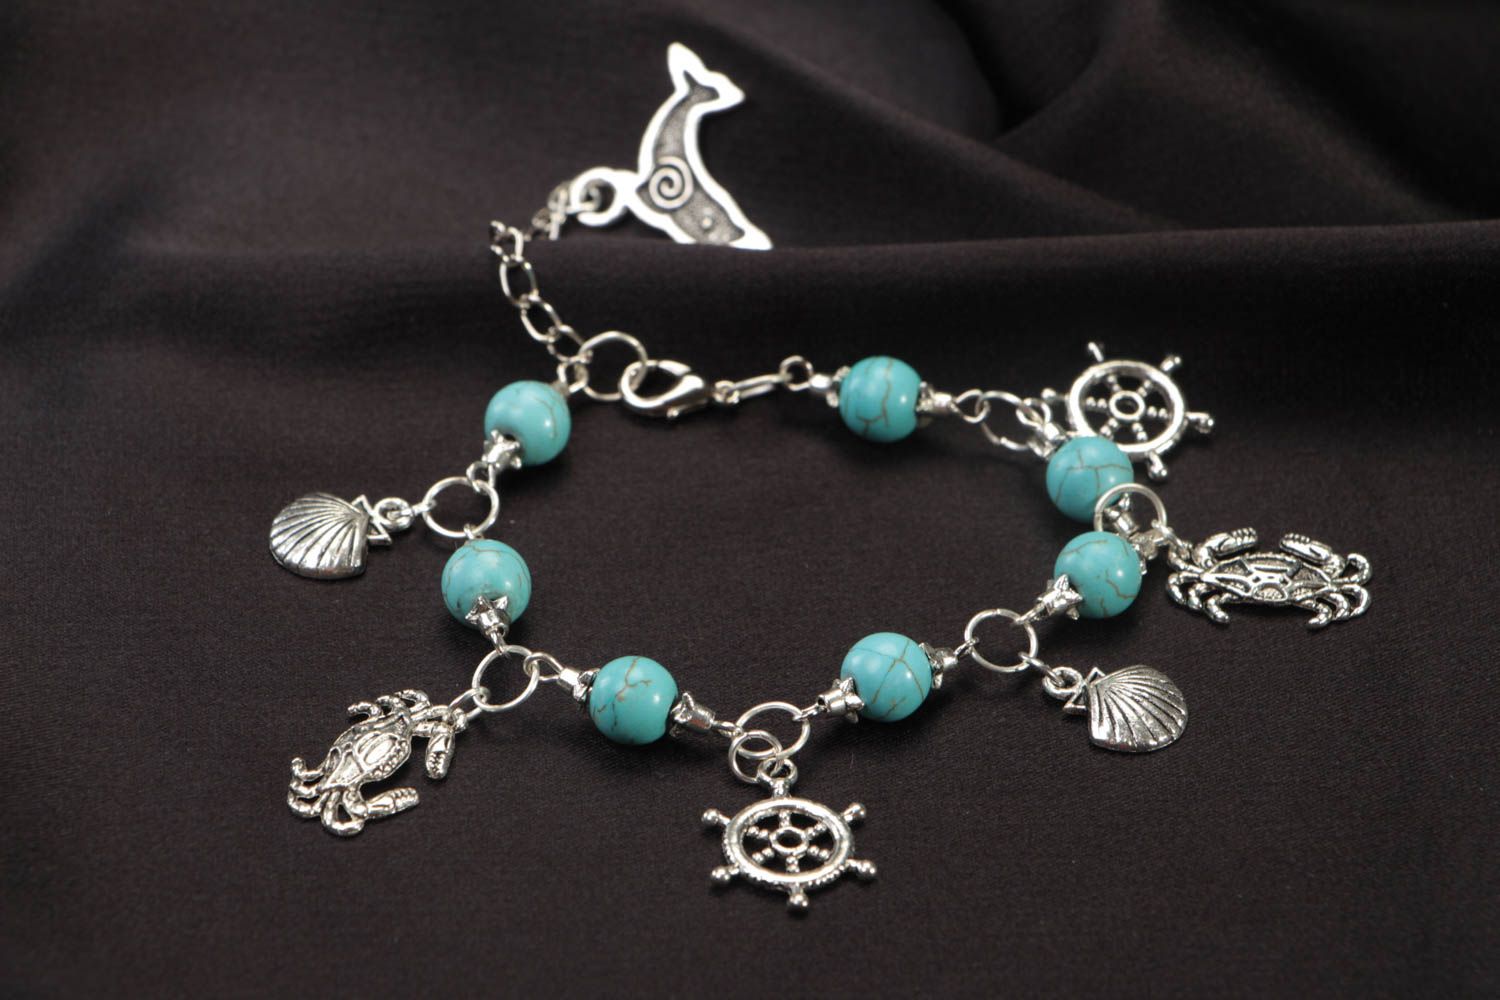 Handmade turquoise bracelet unusual accessory with metal charms cute jewelry photo 1